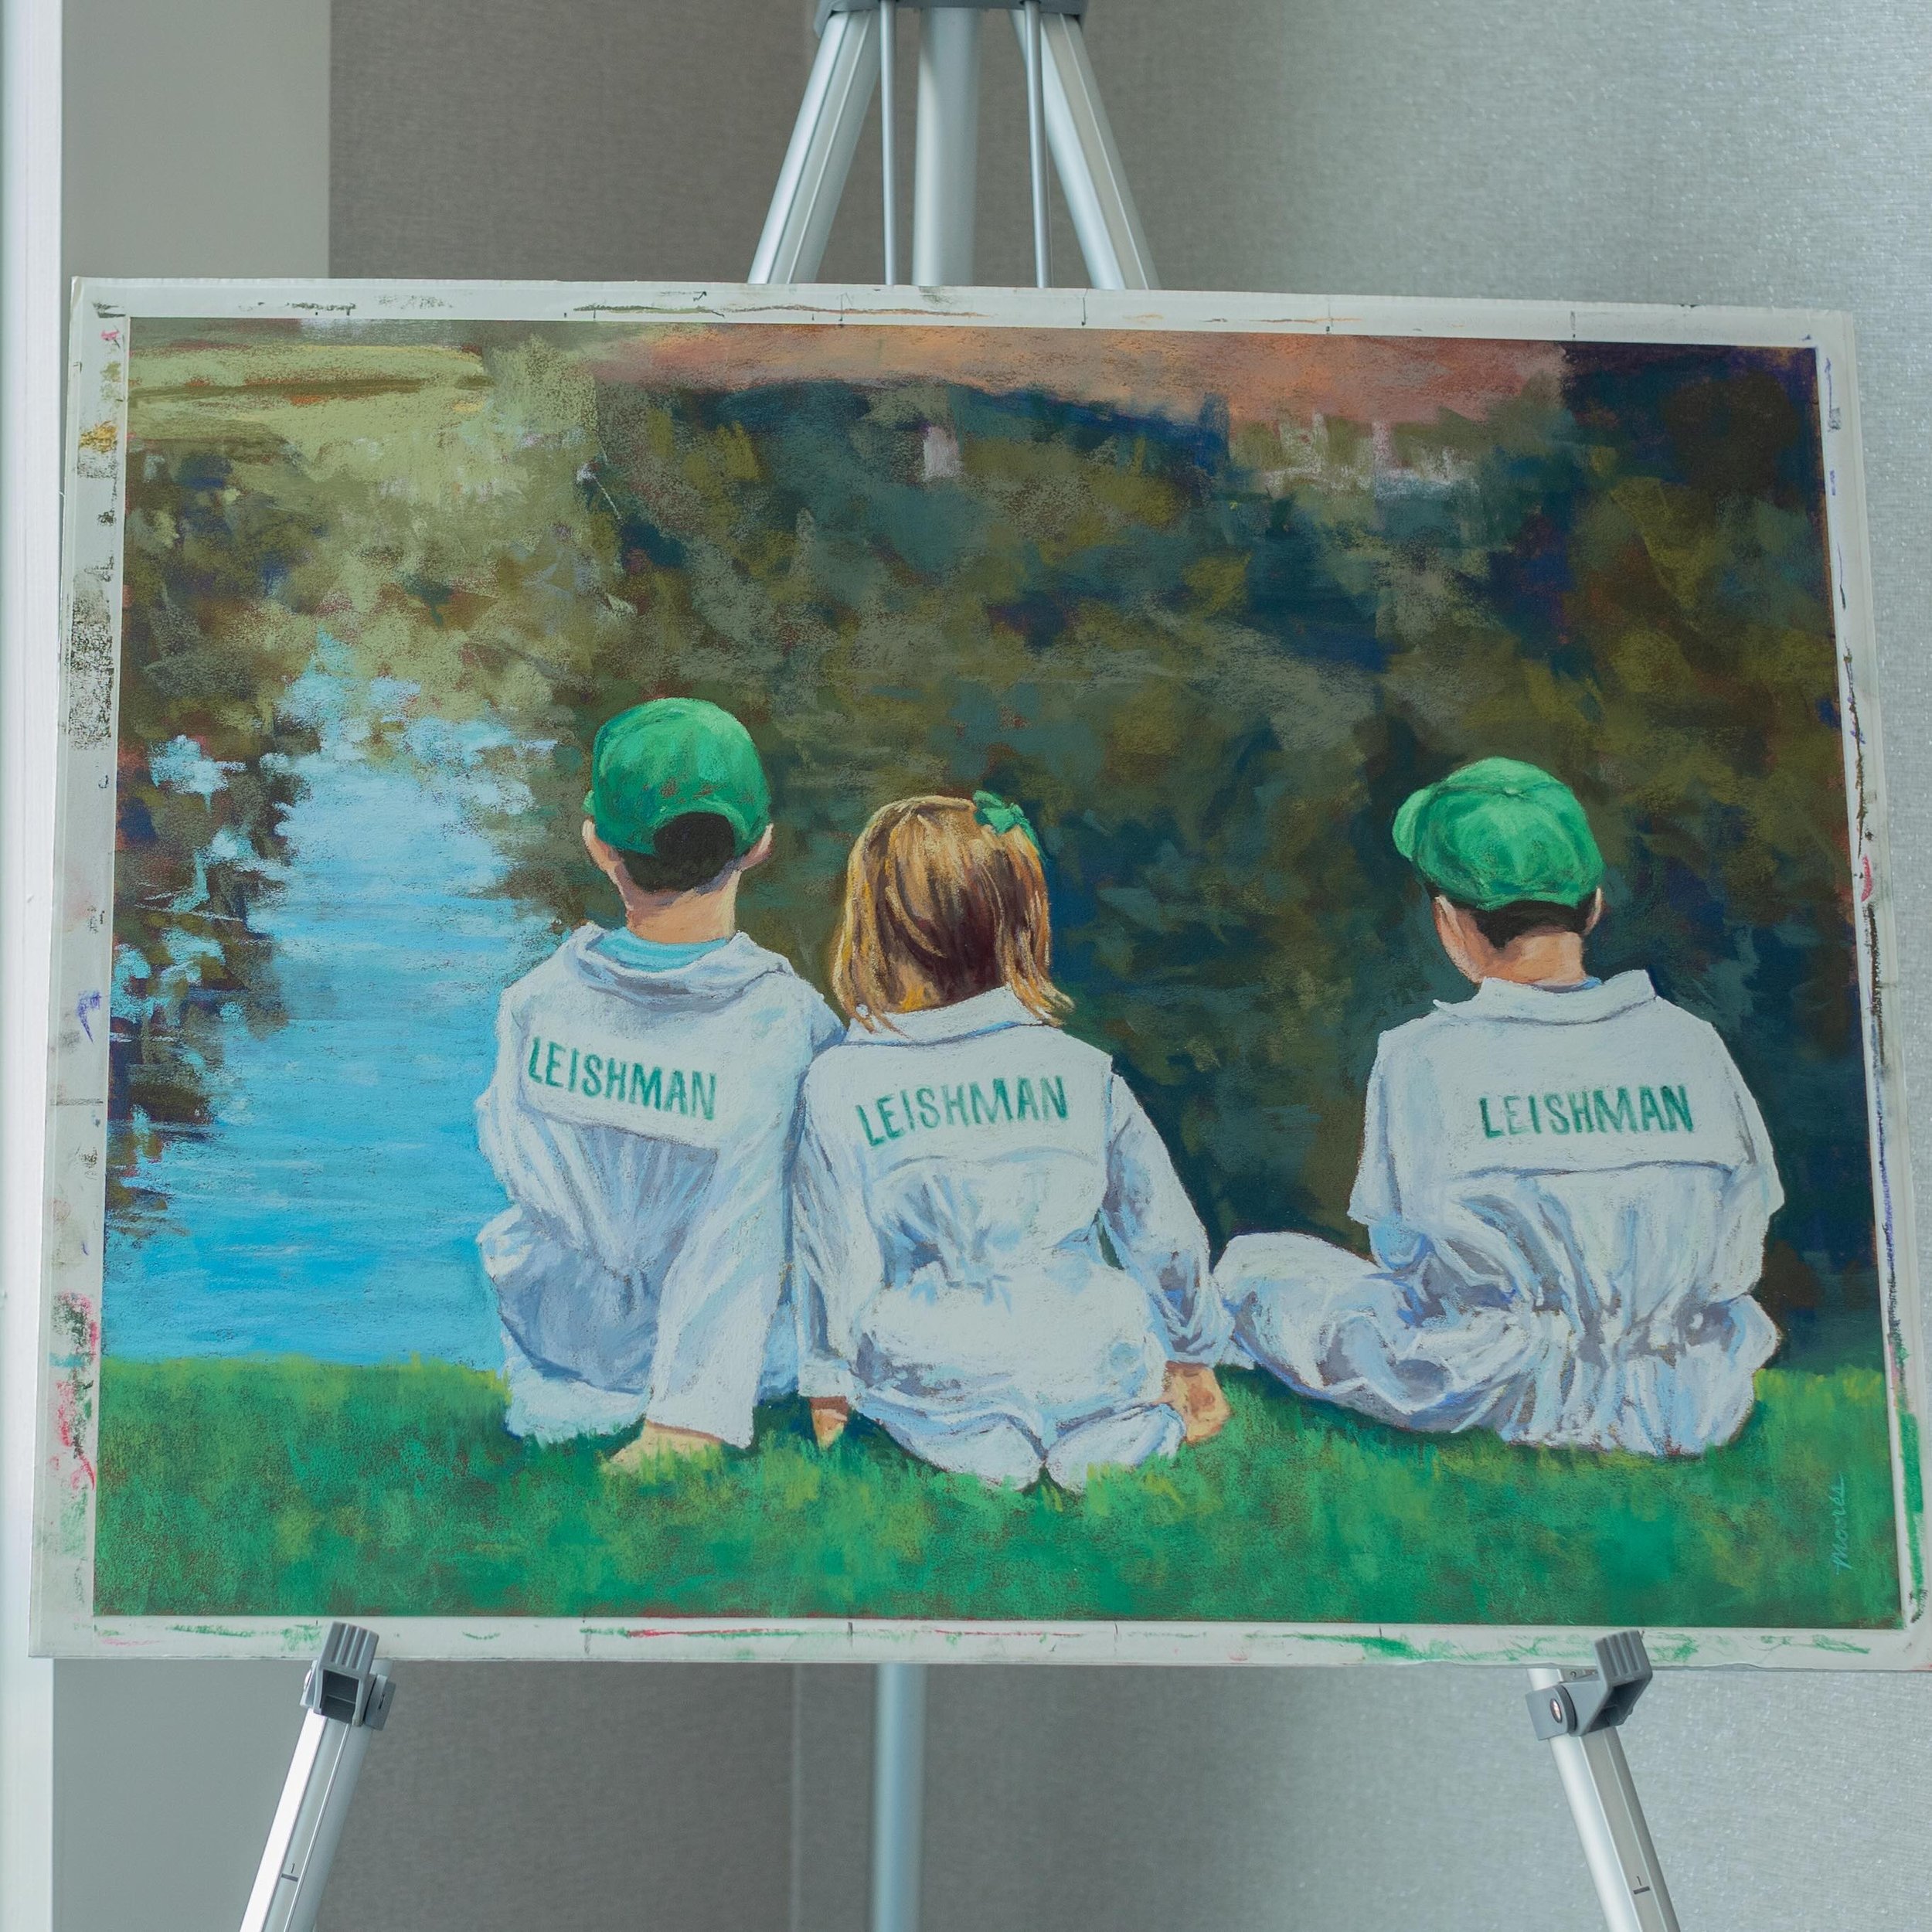 The perfect time to reshare this tremendous gift mother of Sepsis survivor, and artist @Marymooresfineart painted for @audreyleishman at our golf and gala event last year.

Don&rsquo;t forget to enter our Masters Swag Giveaway. {See prior post for de